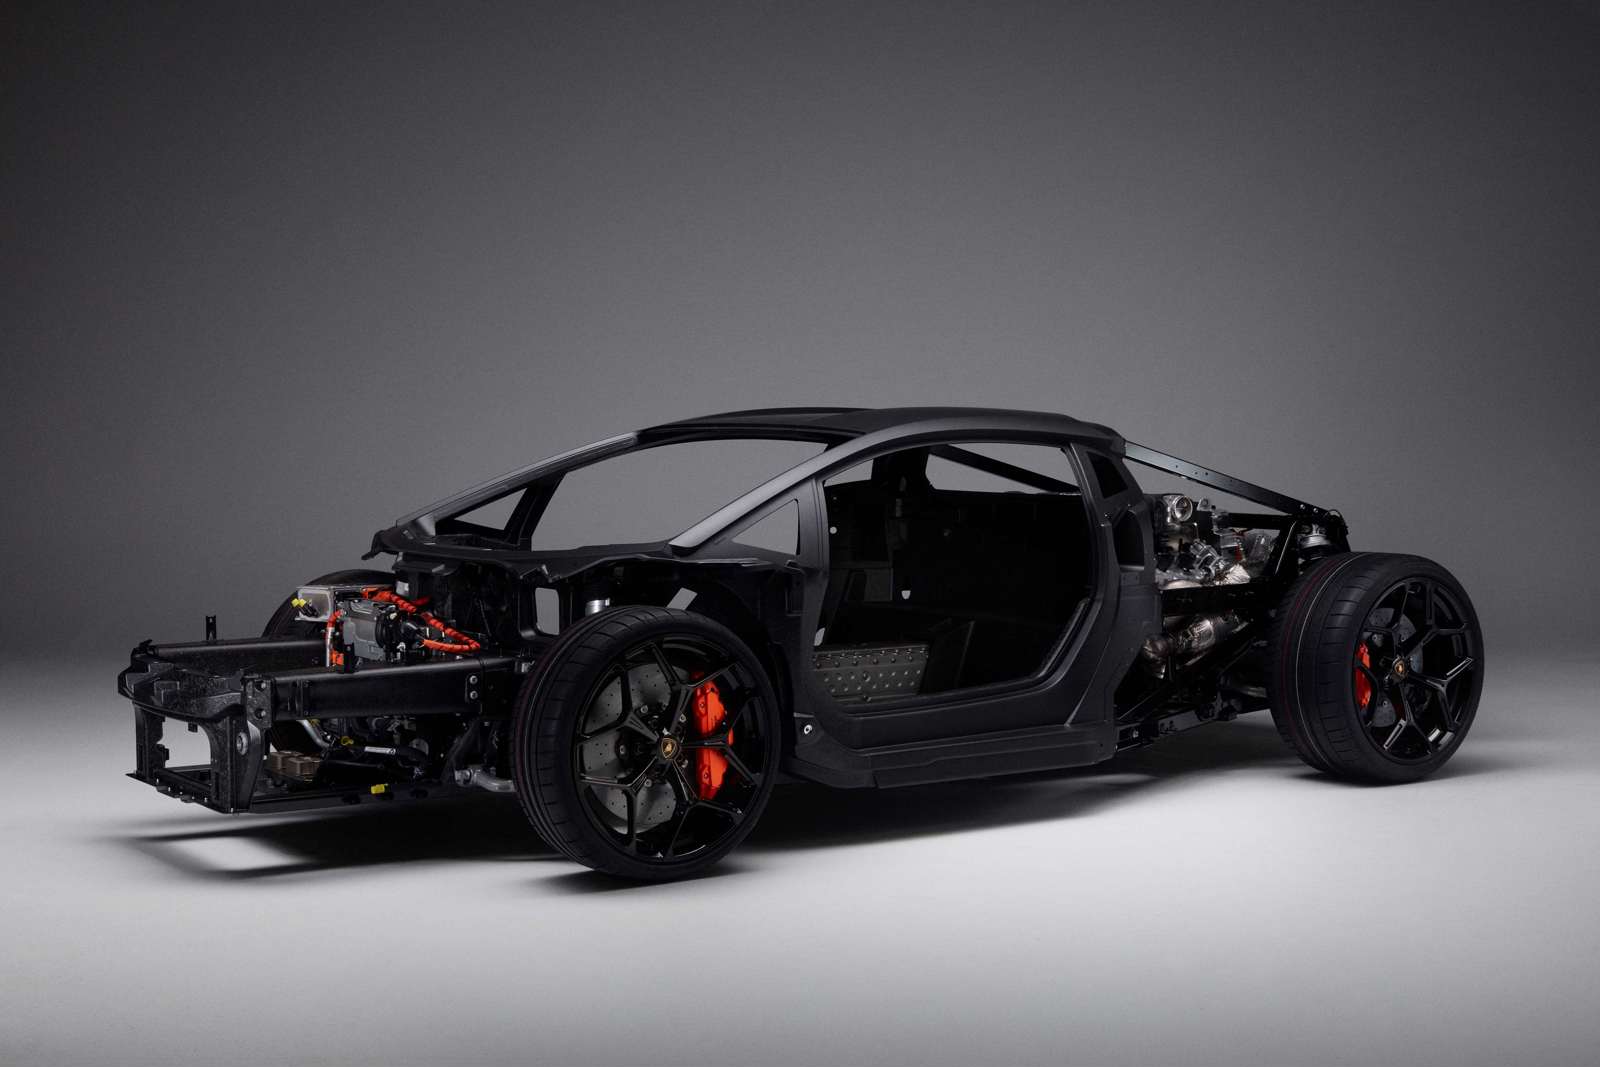 Lambo hybrid V12 to feature world-first forged carbon structure | GRR